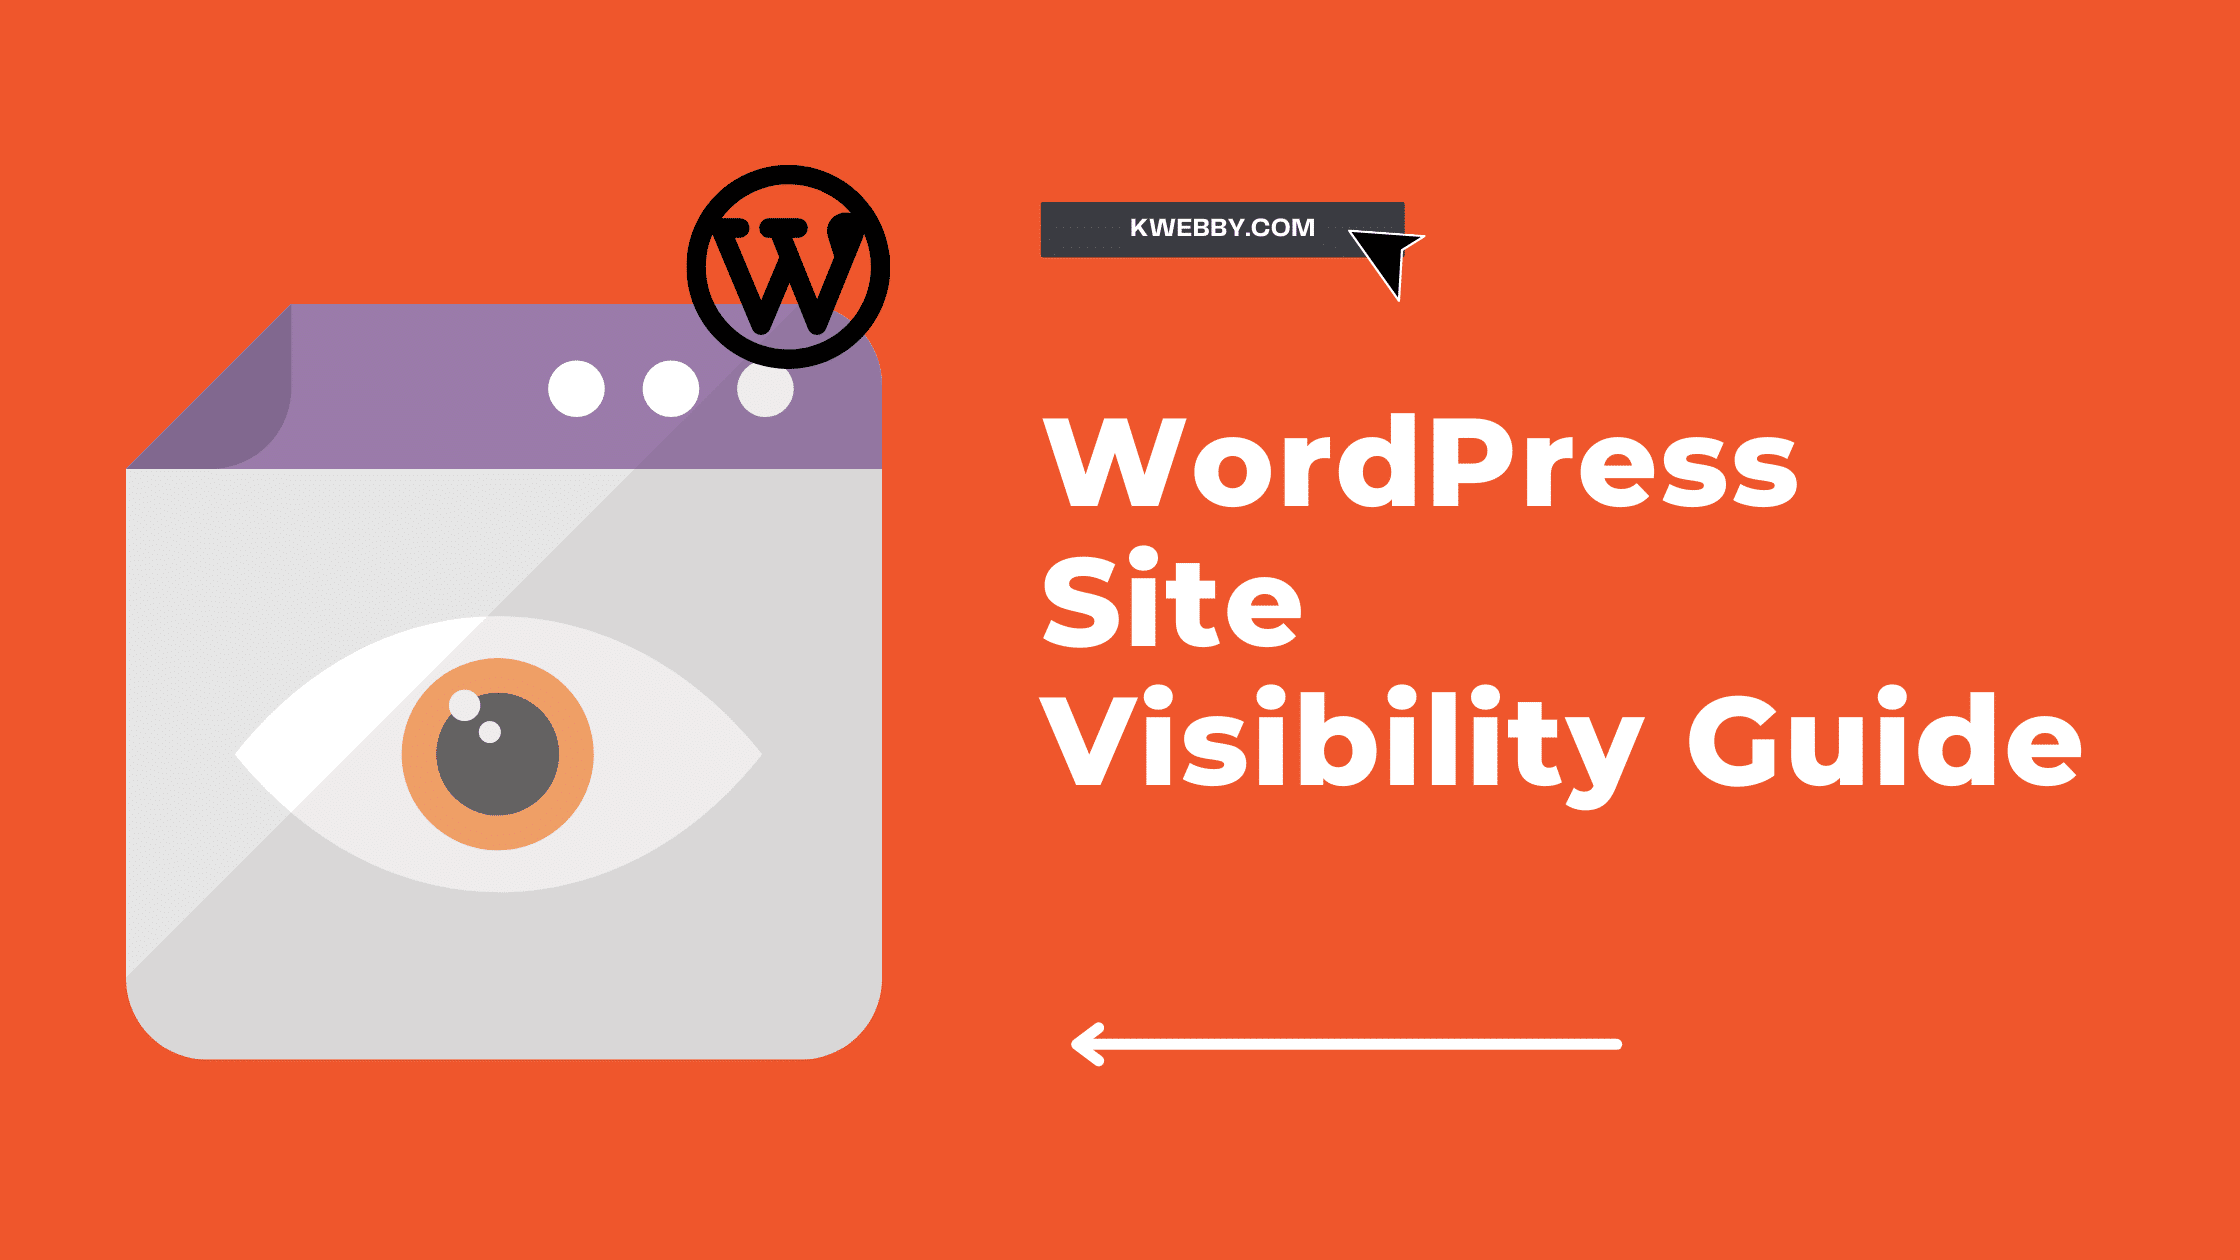 How to Make My WordPress Site Visible on Google Search